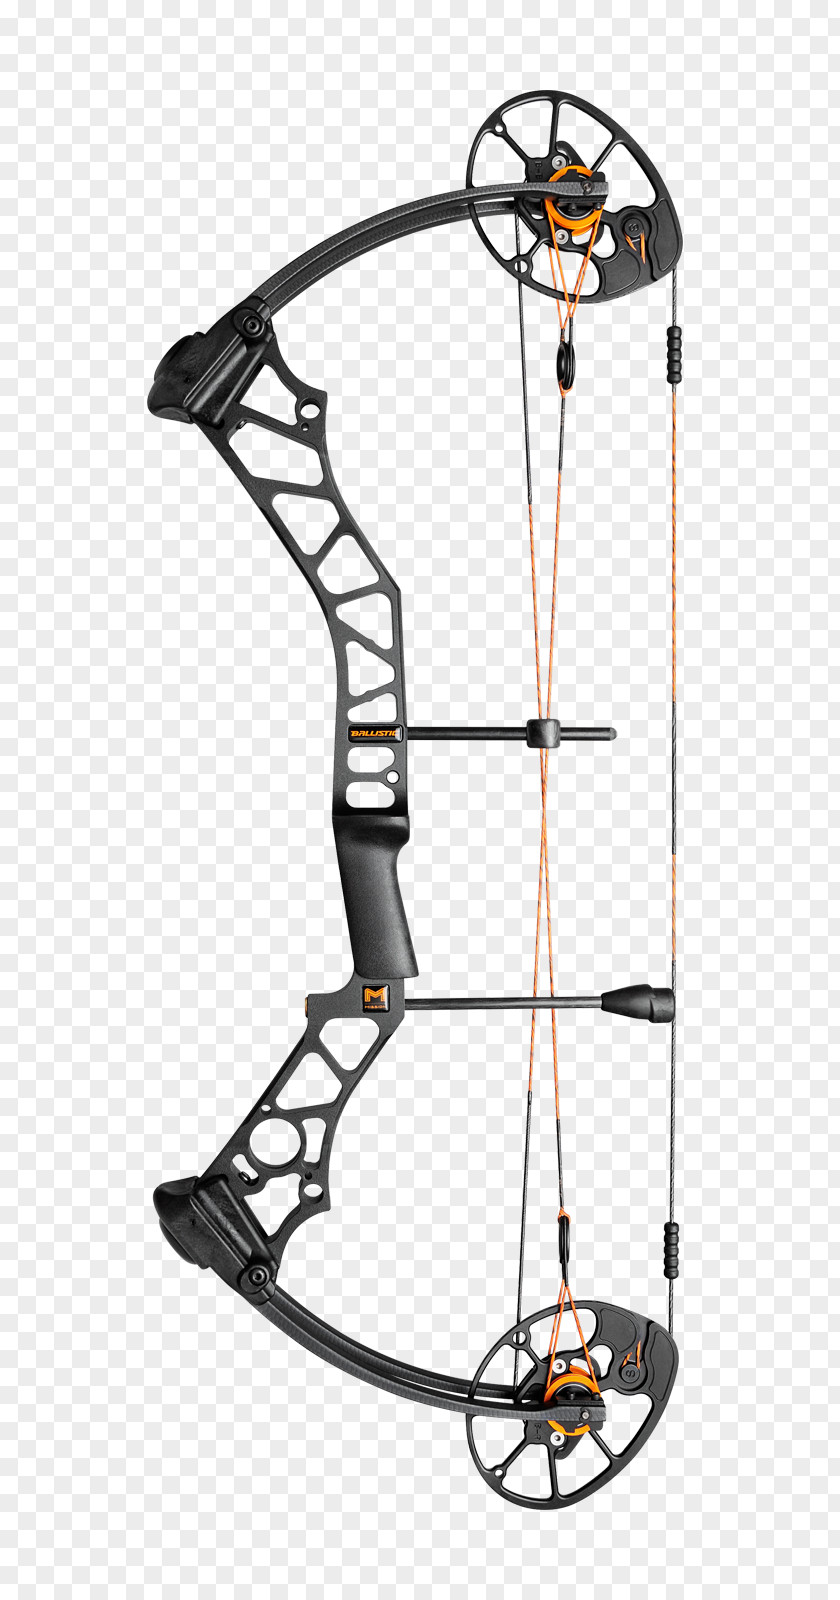 Compound Bows Hunting Ballistics Bow And Arrow Crossbow PNG